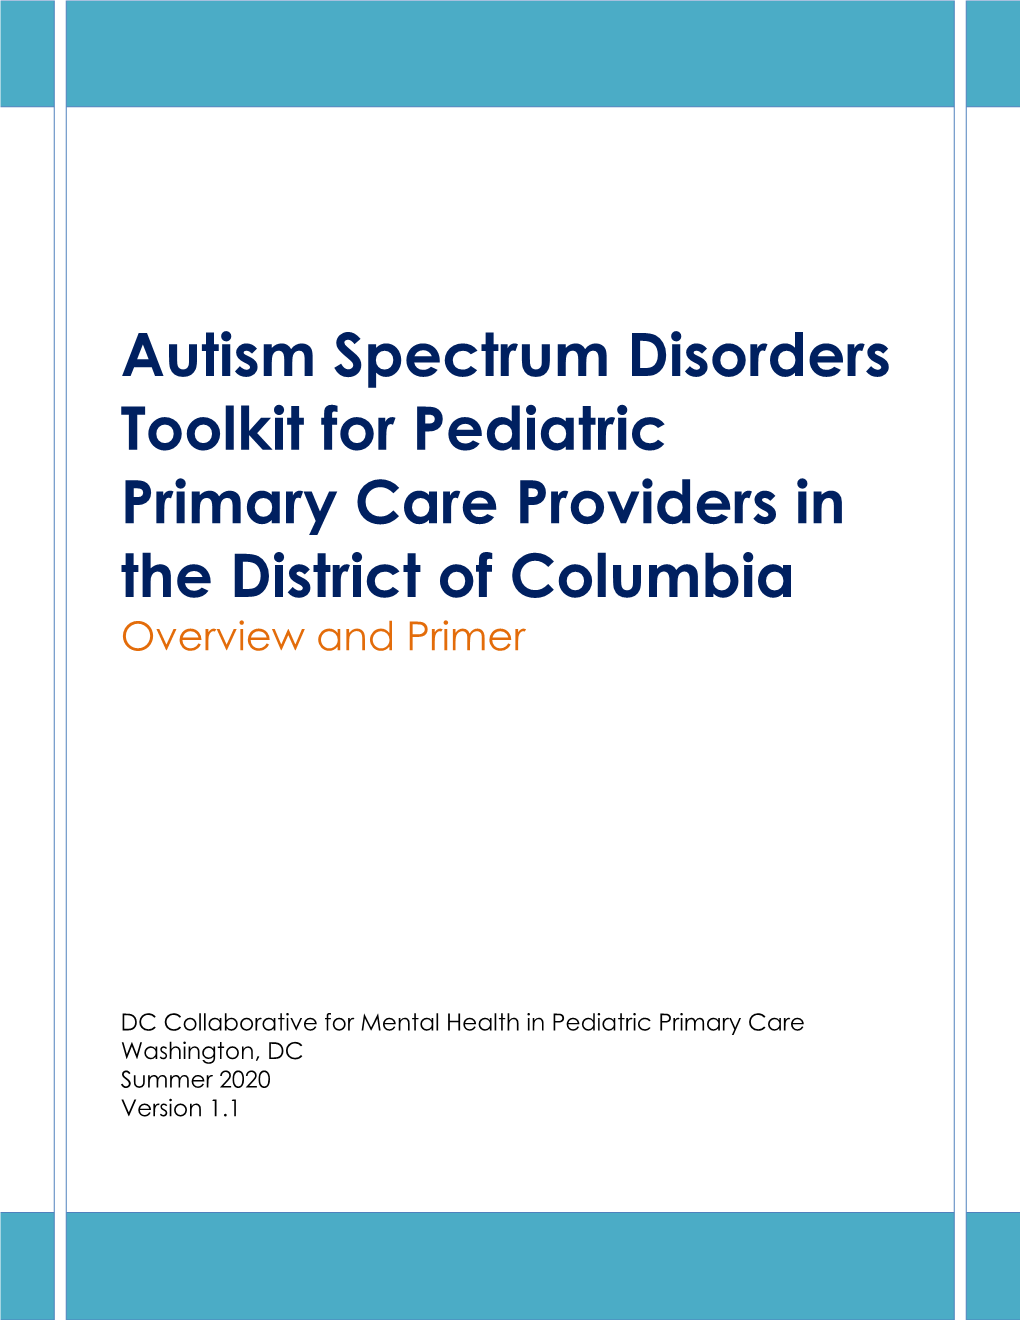 Autism Spectrum Disorders Toolkit for Pediatric Primary Care Providers in the District of Columbia Overview and Primer